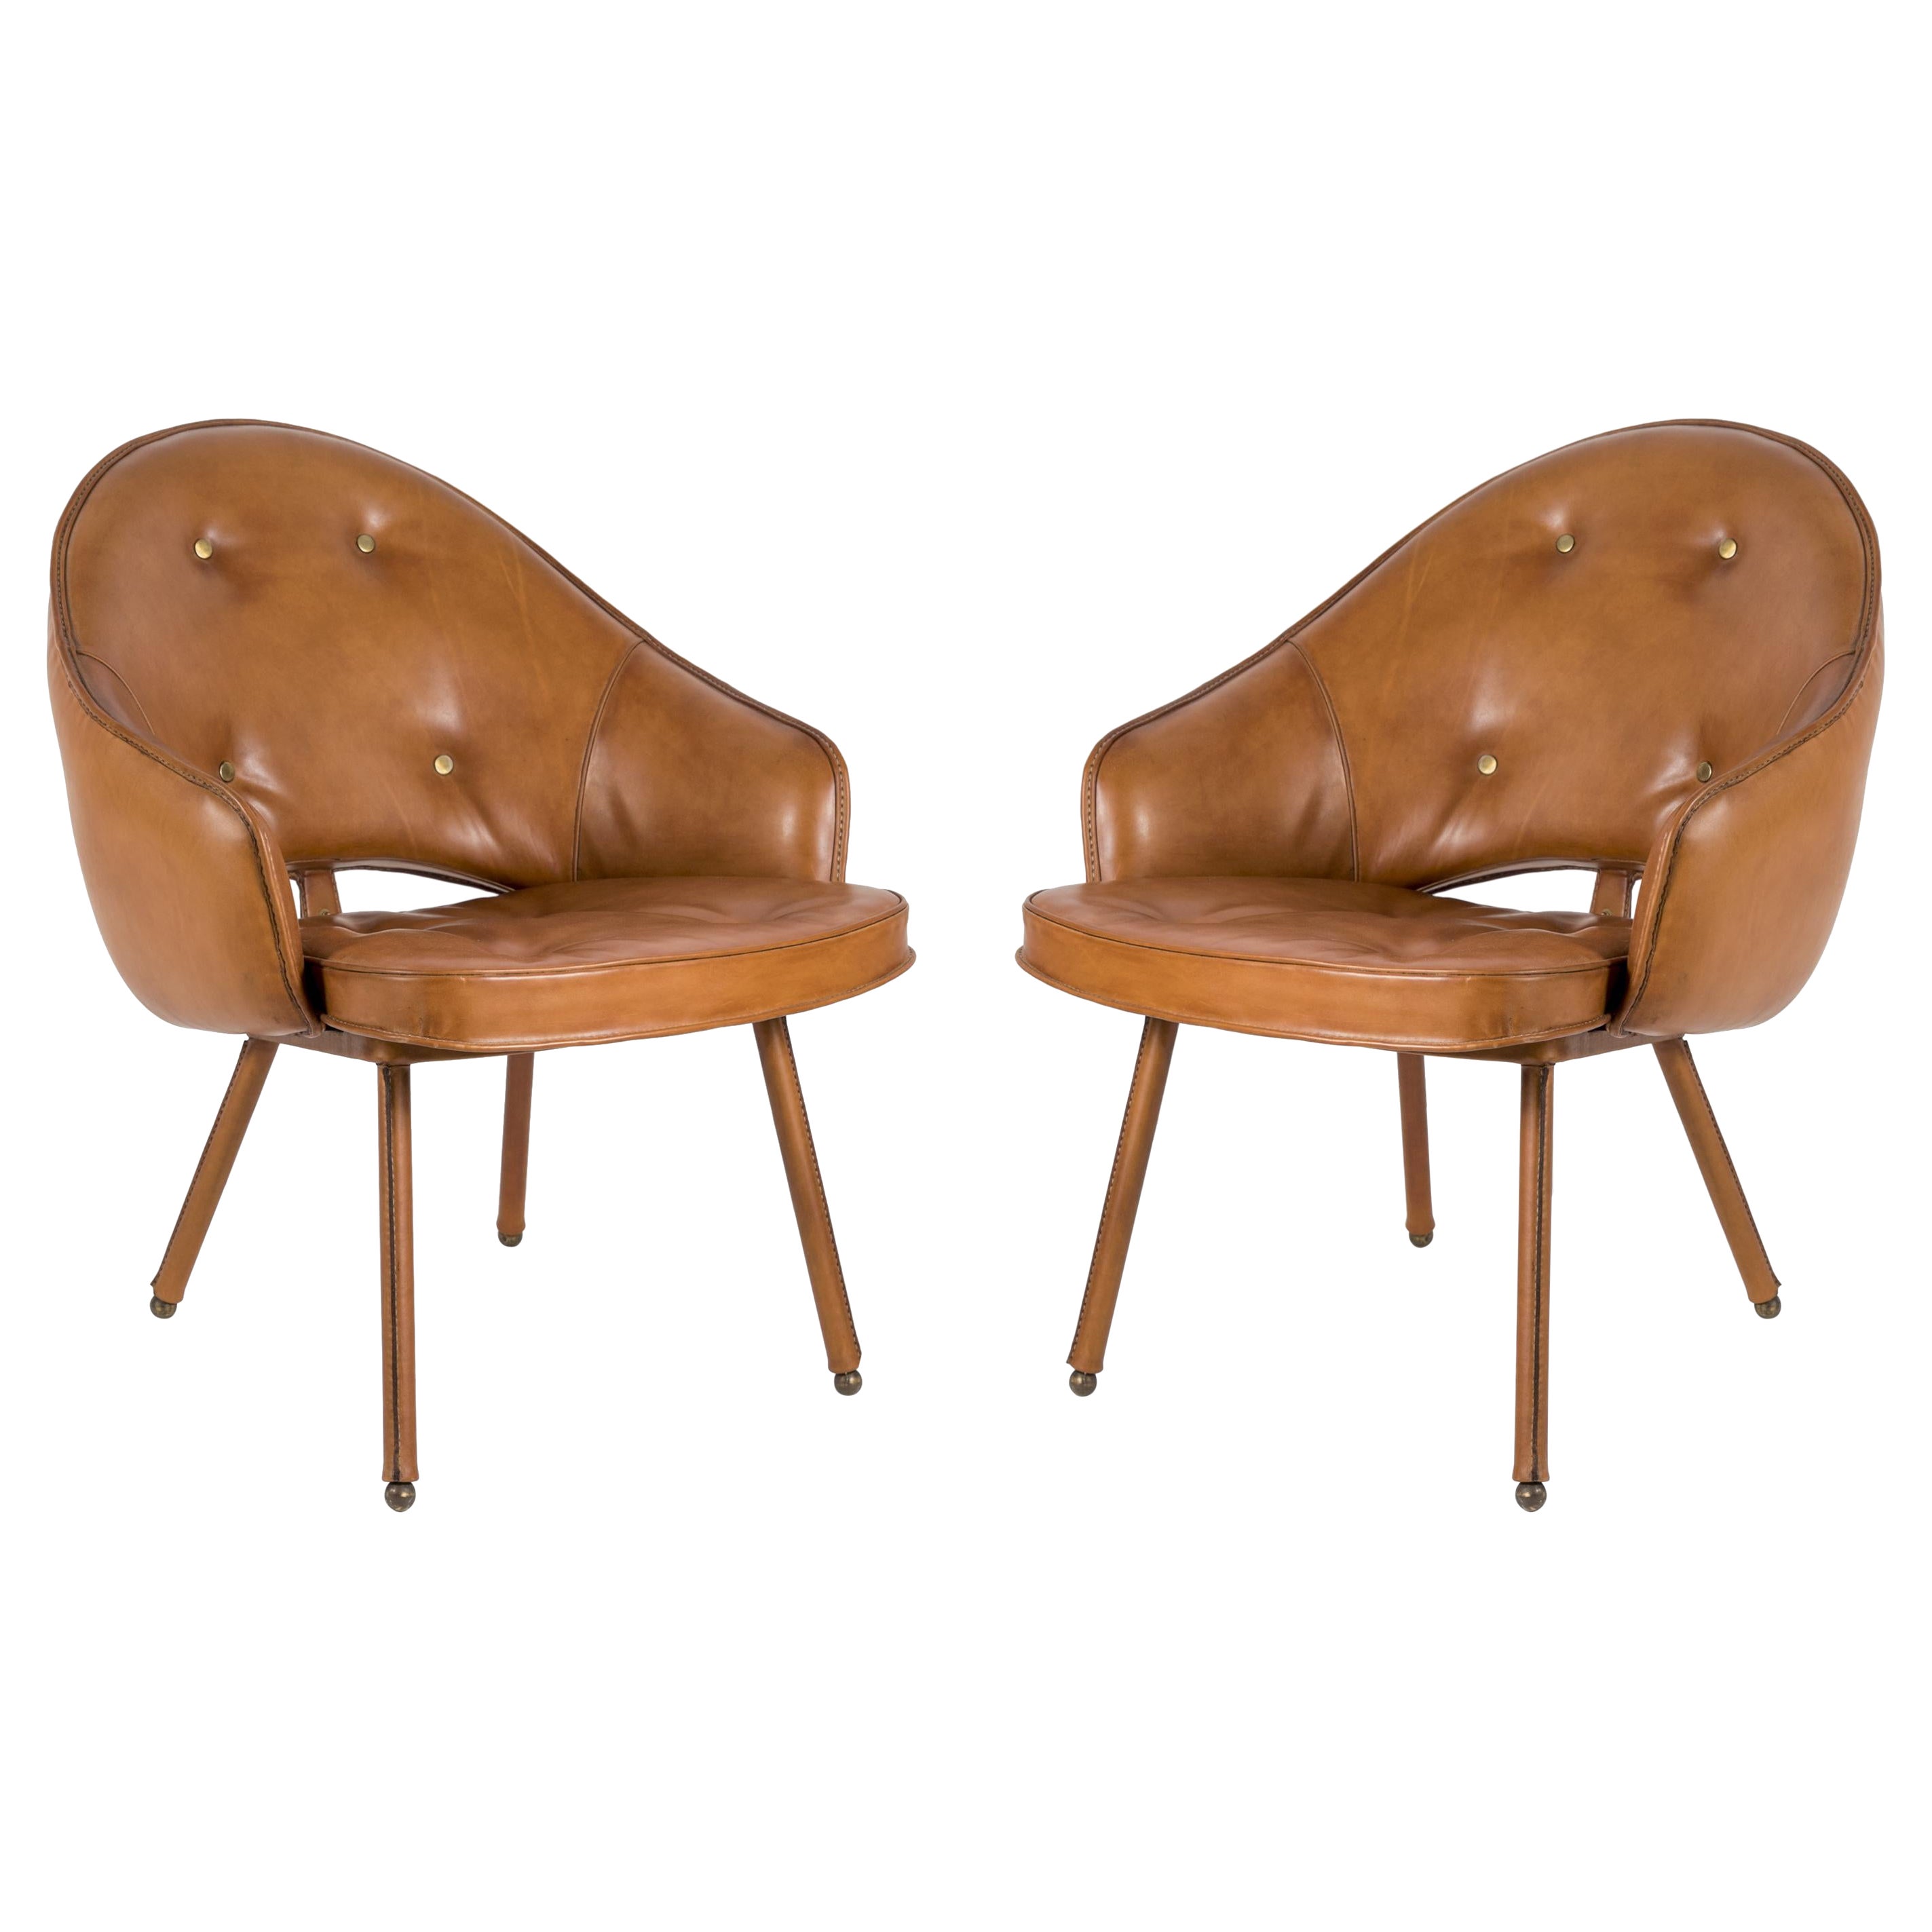 Pair of 1950's Stitched Leather Armchairs by Jacques Adnet For Sale